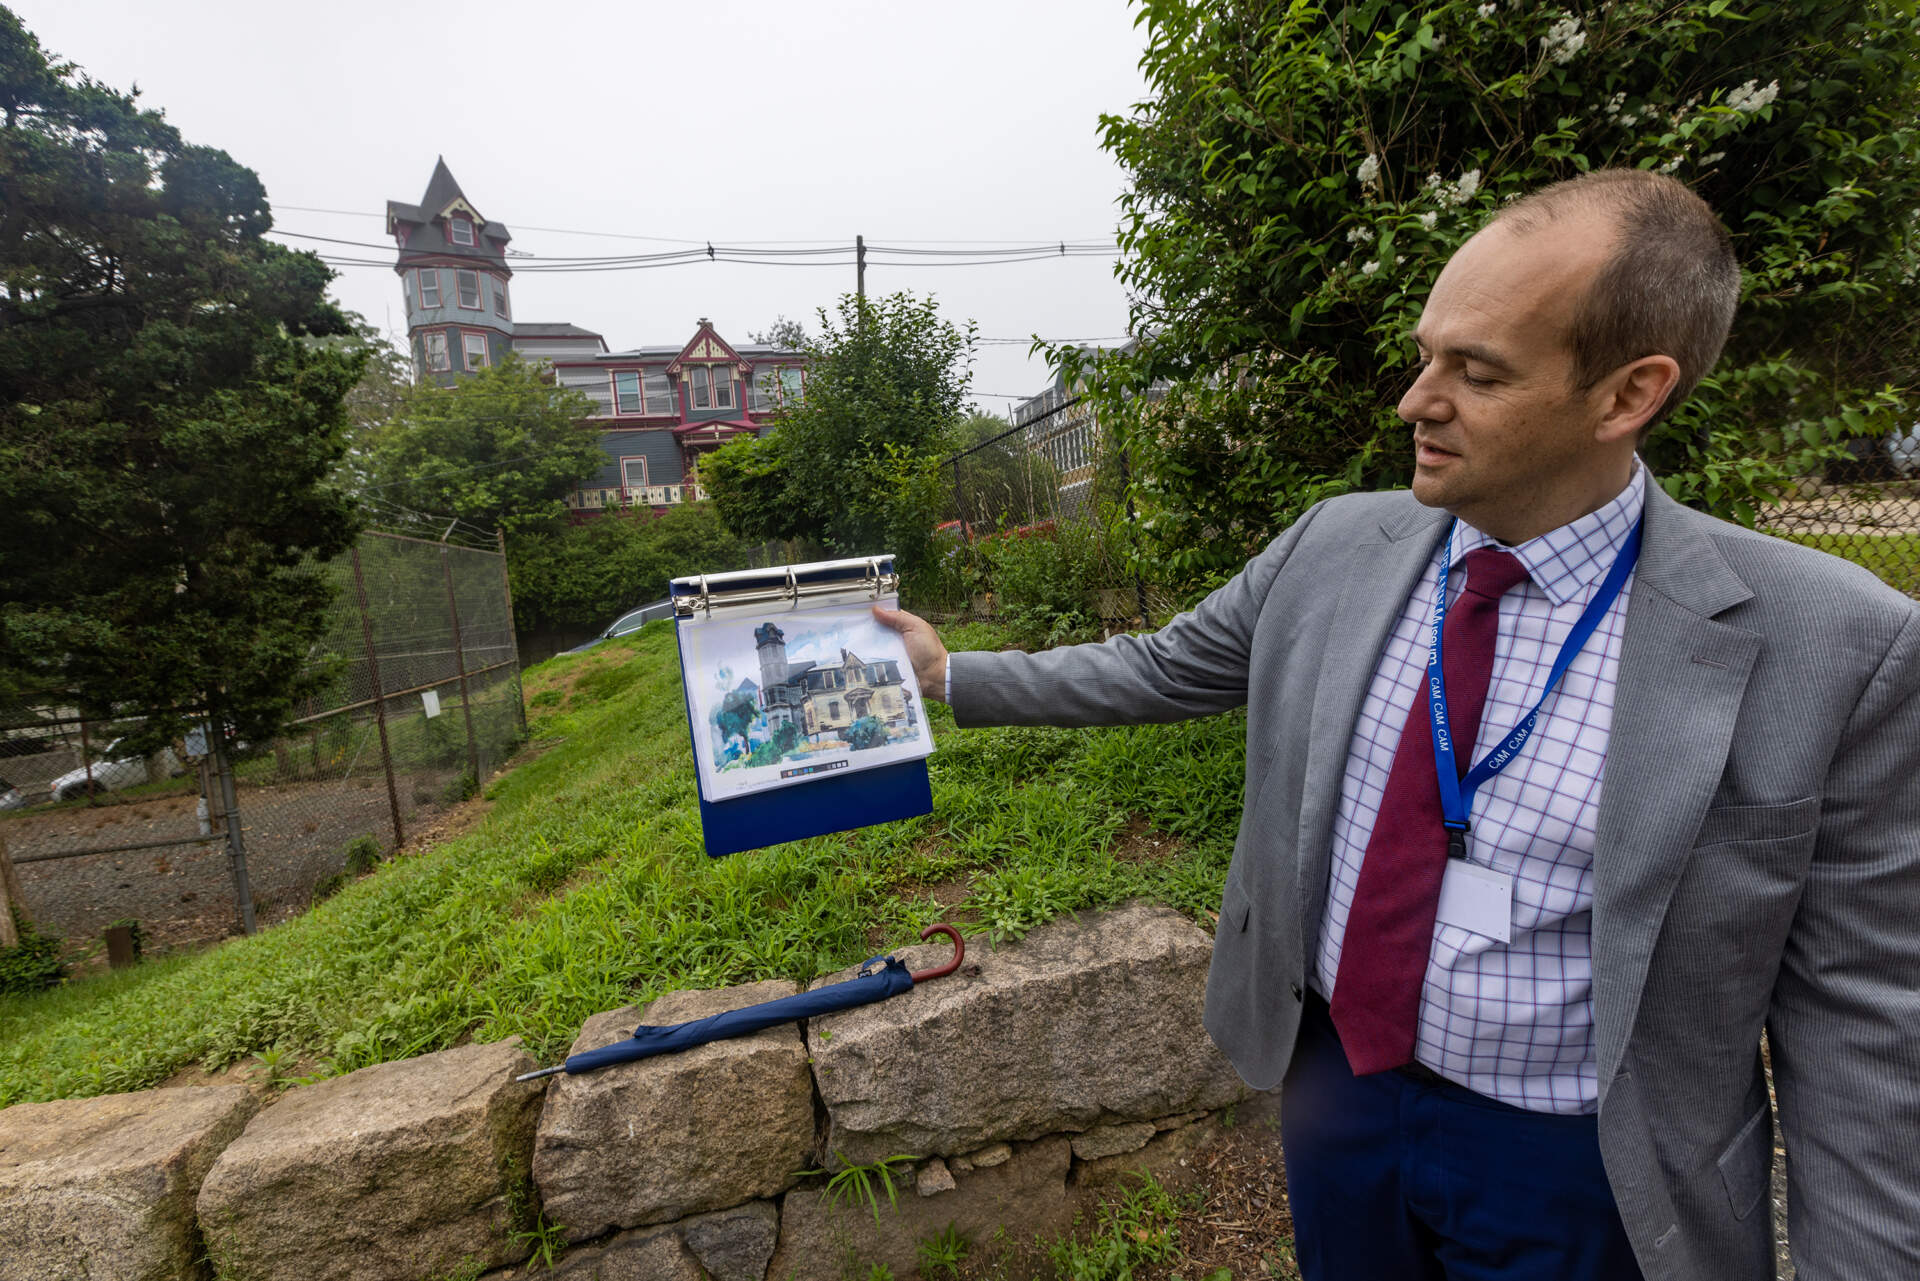 Cape Ann Museum Director Oliver Barker compares the view from where he is standing to Edward Hopper’s painting of the Loring Haskell House, which will be part of the walking tour around the city. (Jesse Costa/WBUR)